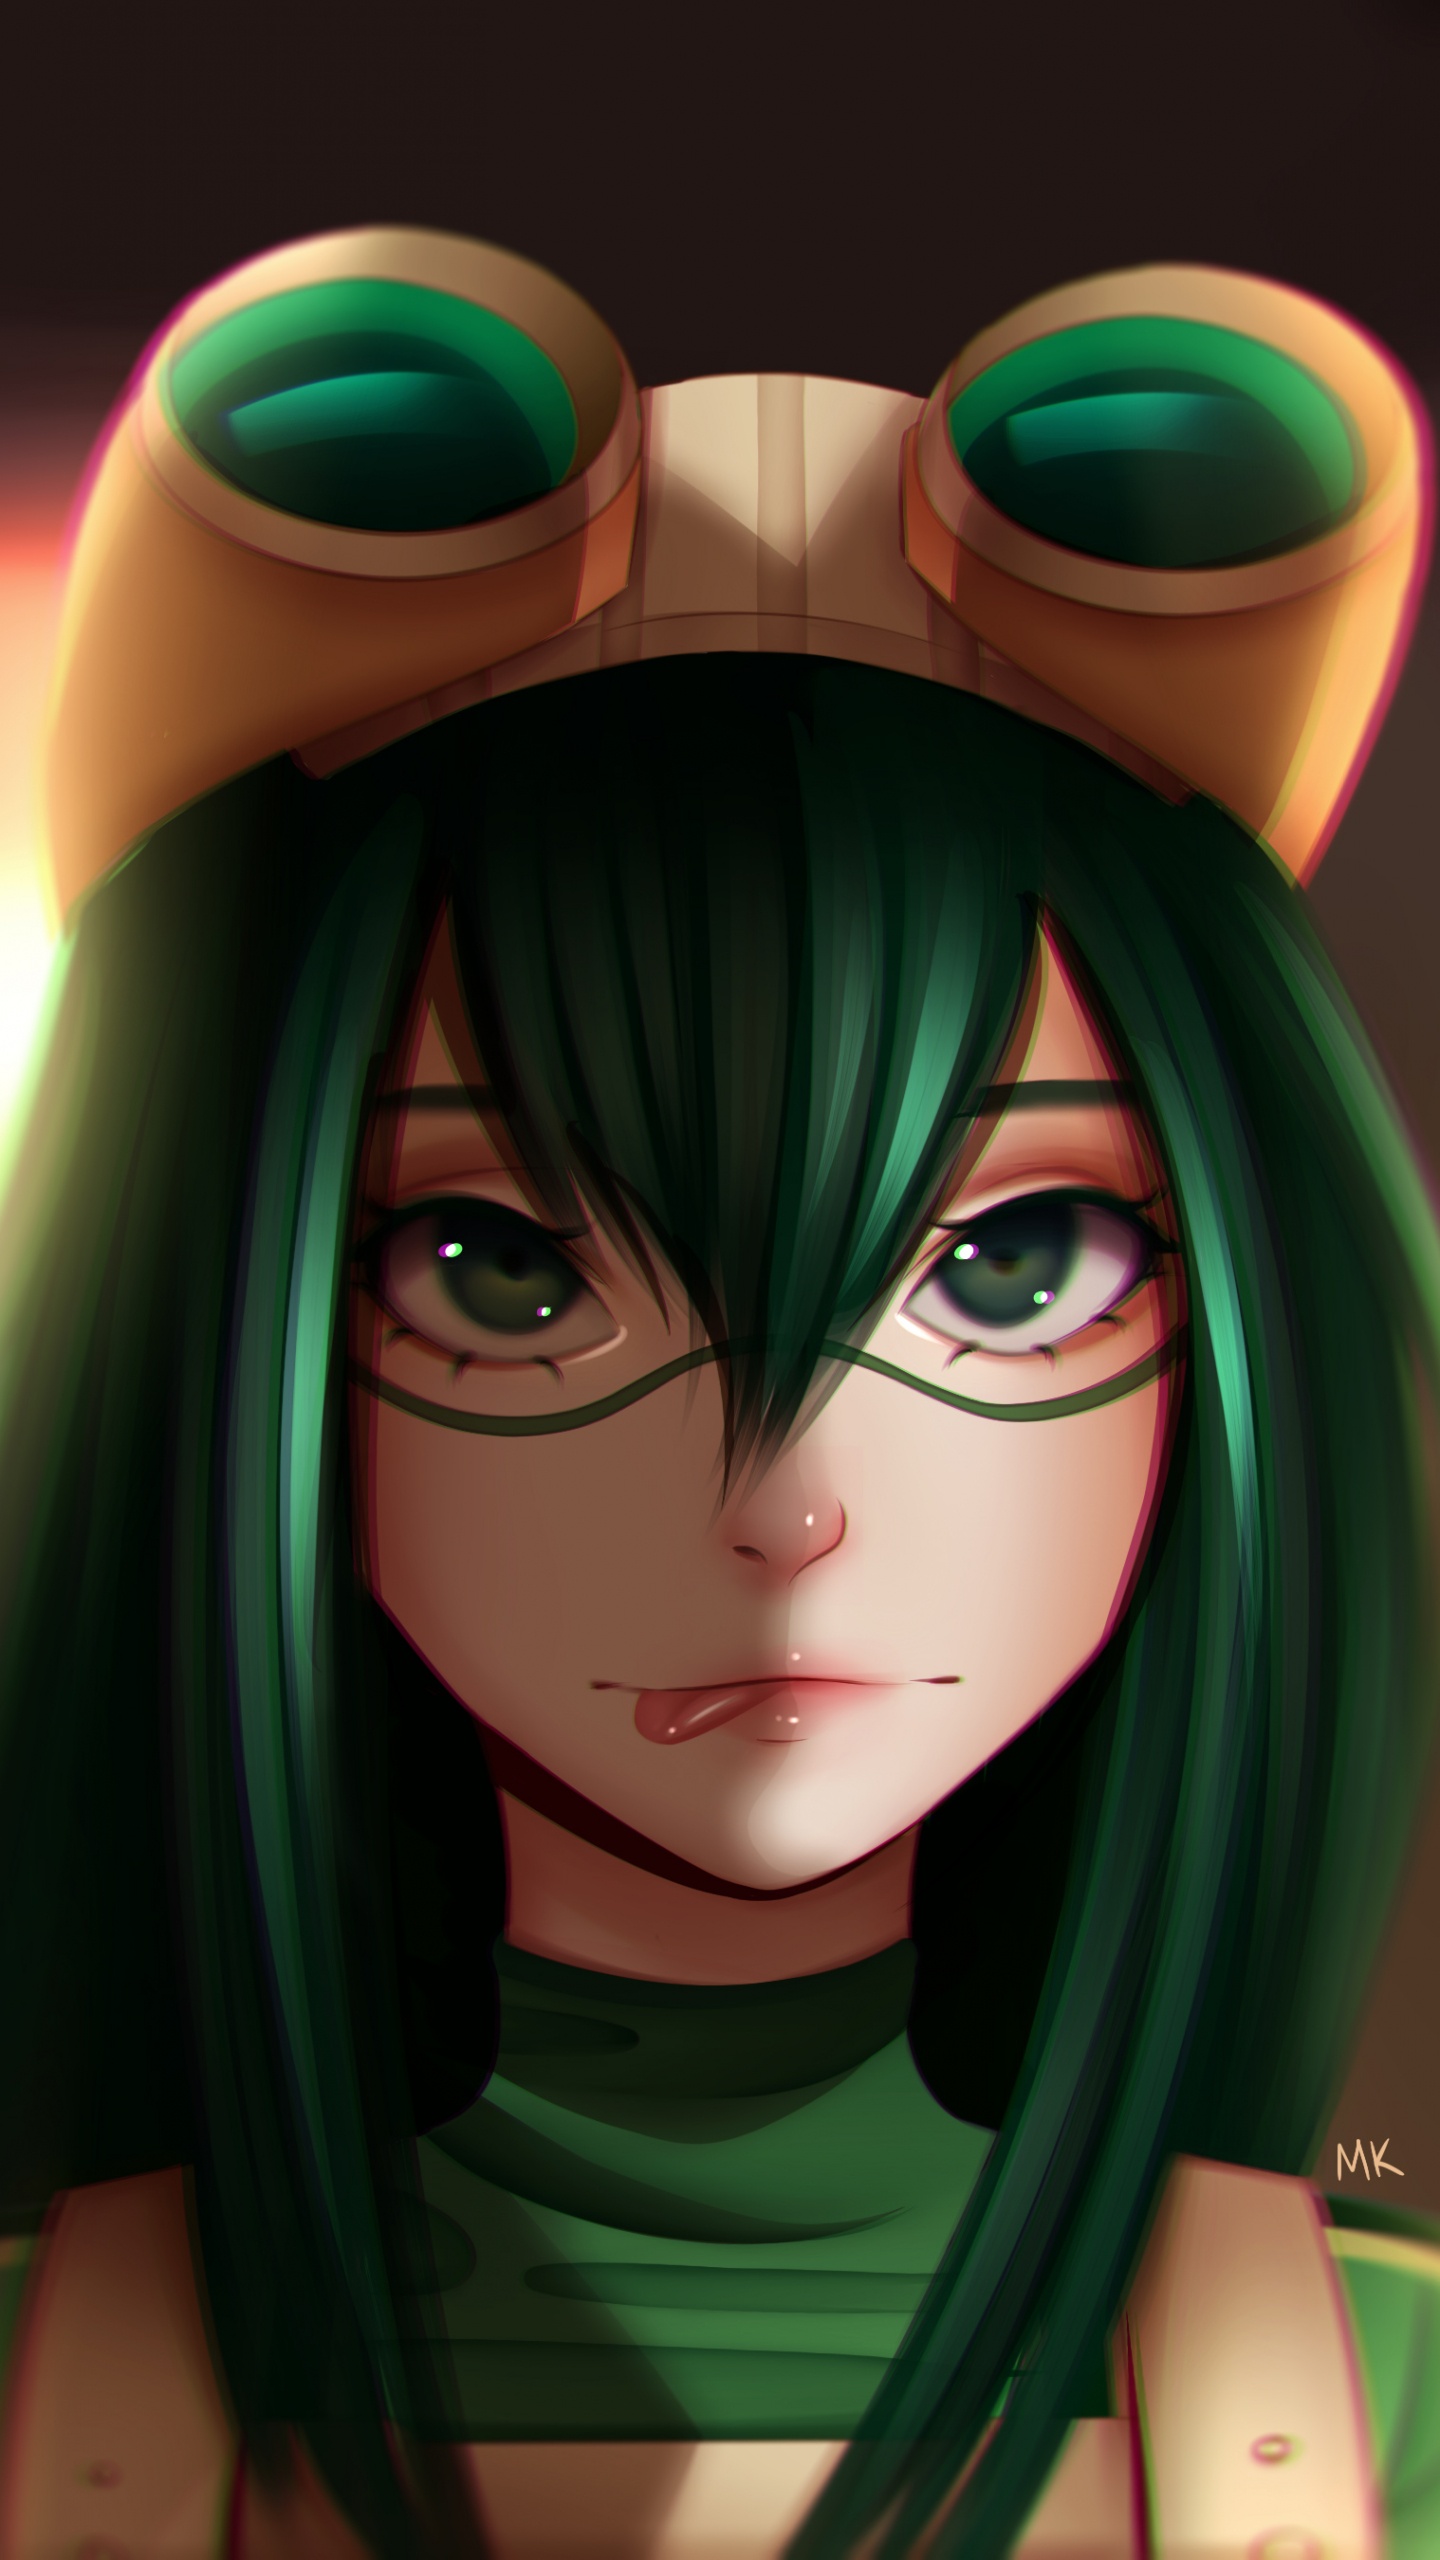 Personnage D'anime Féminin Aux Cheveux Verts. Wallpaper in 1440x2560 Resolution